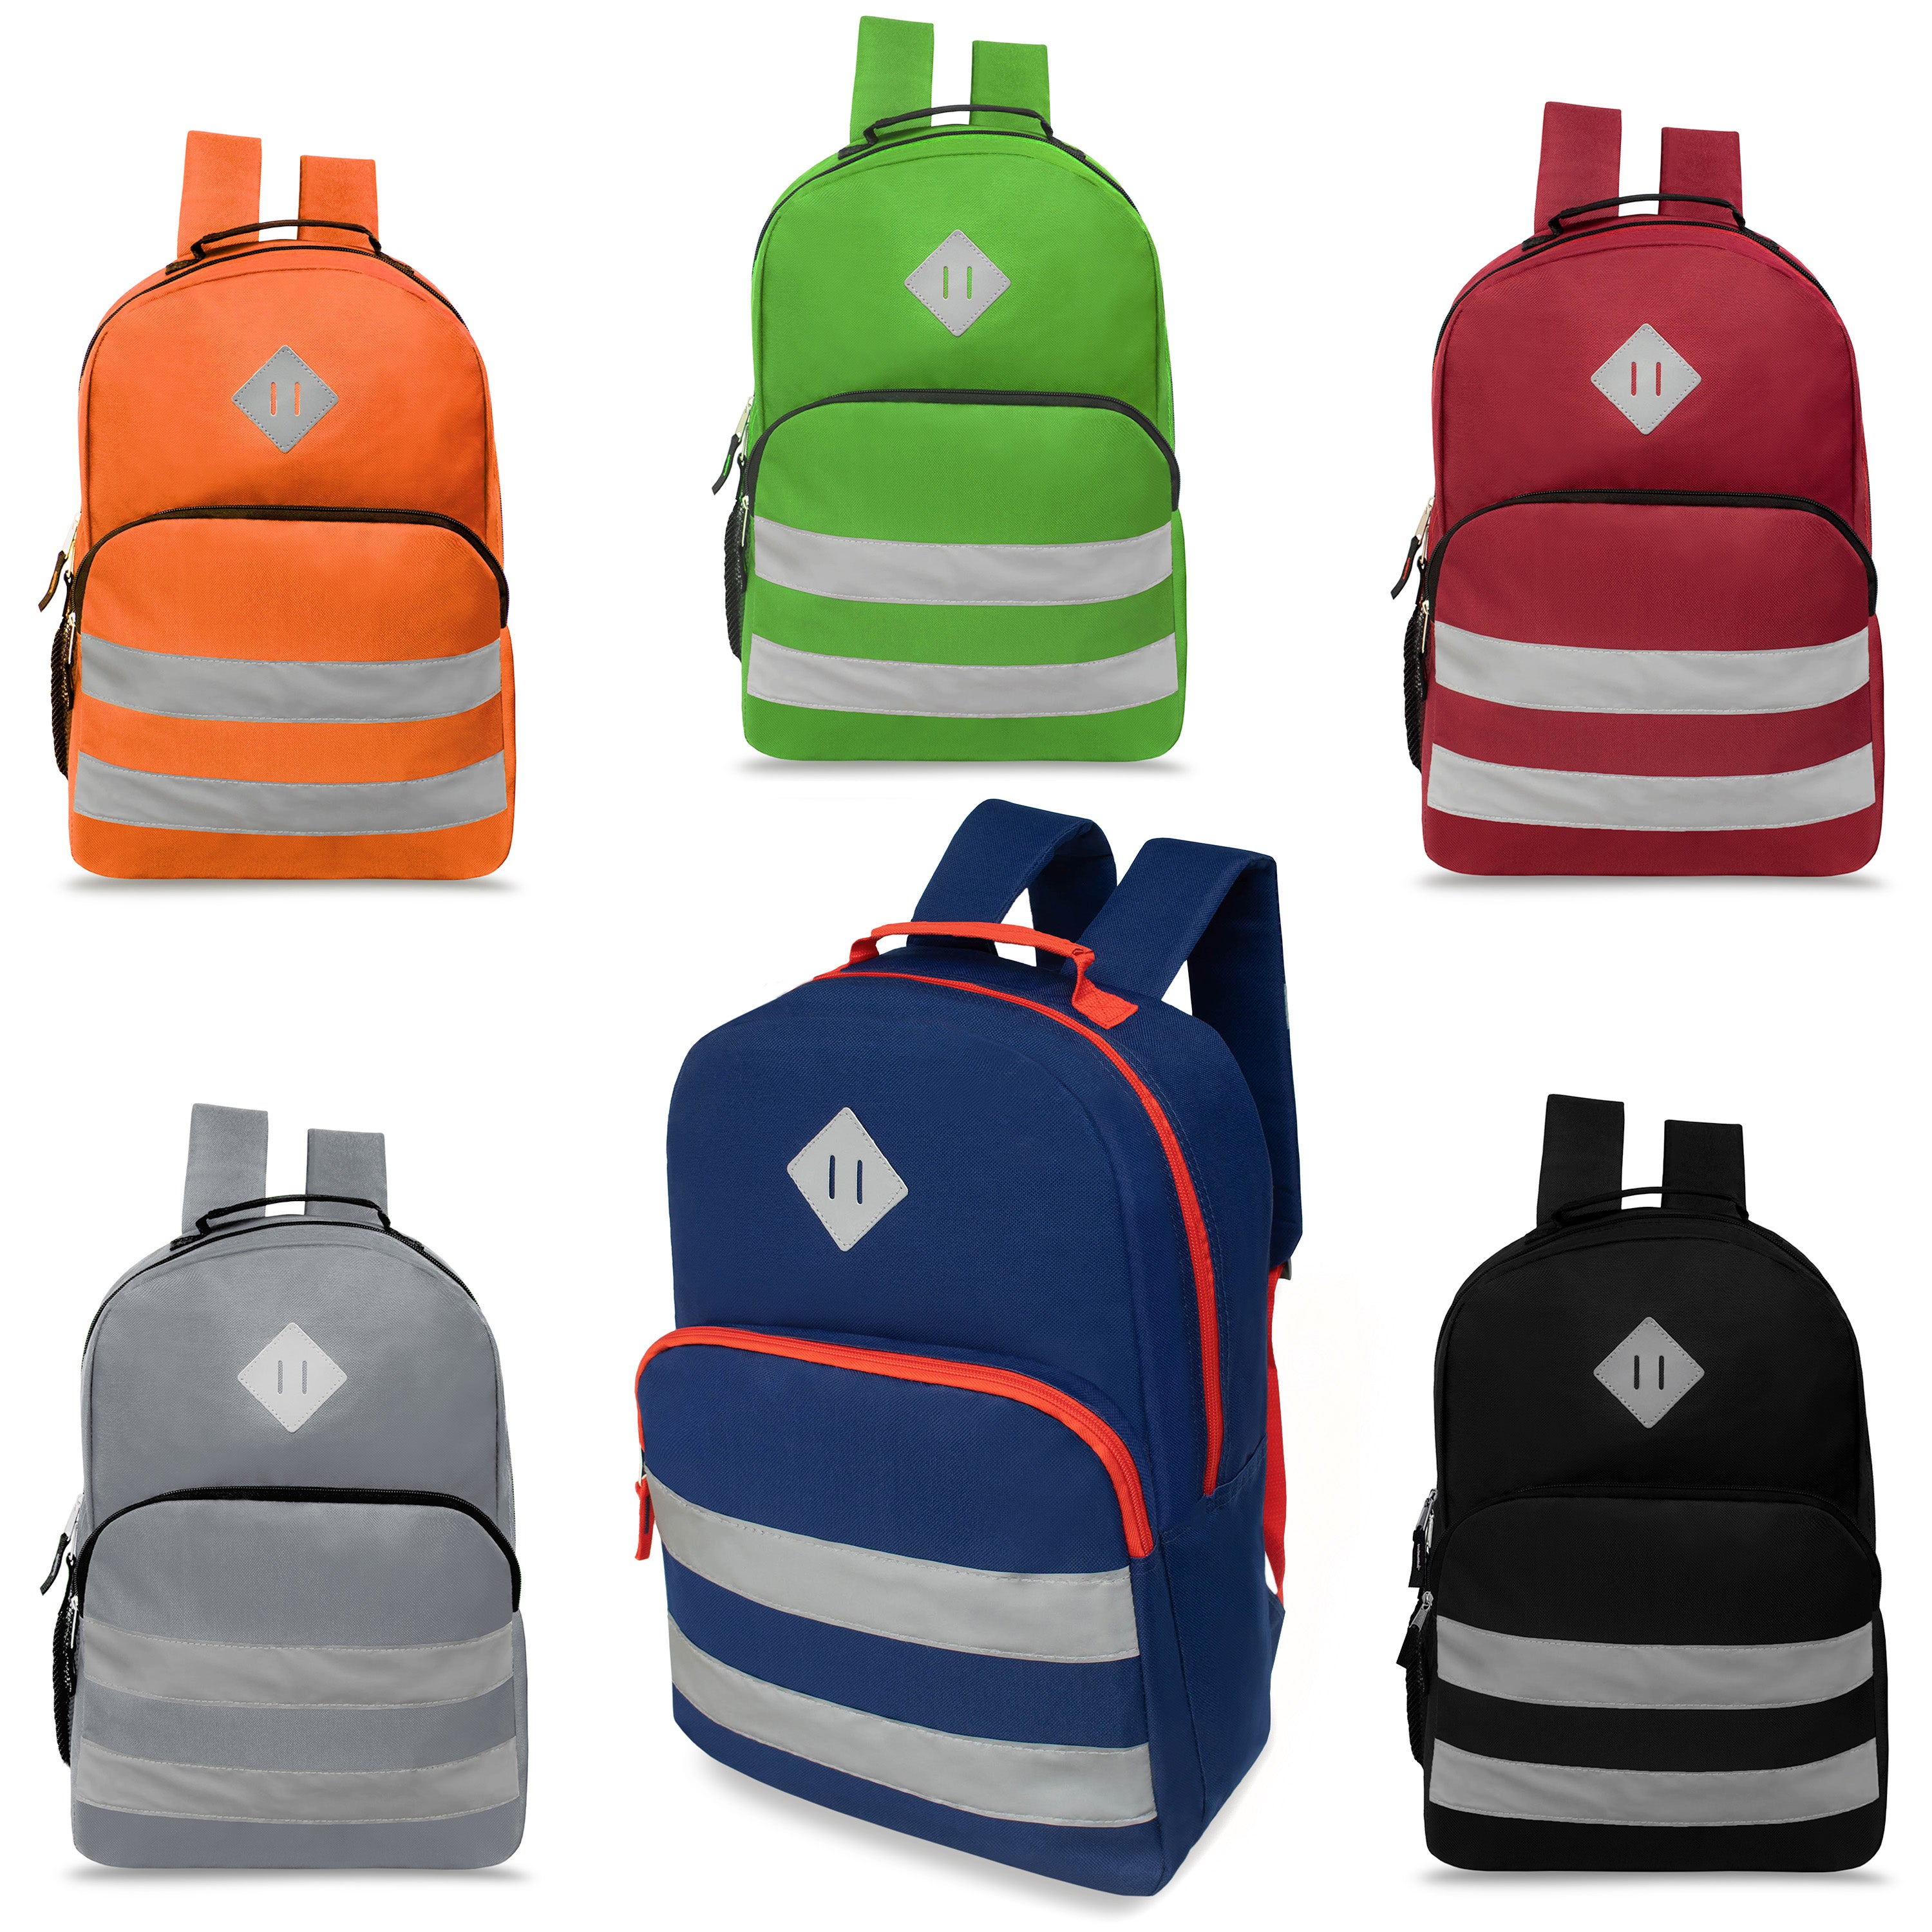 12 Wholesale 17" Reflective backpacks in Assorted Colors & 12 Bulk School Supply Kits of Your Choice